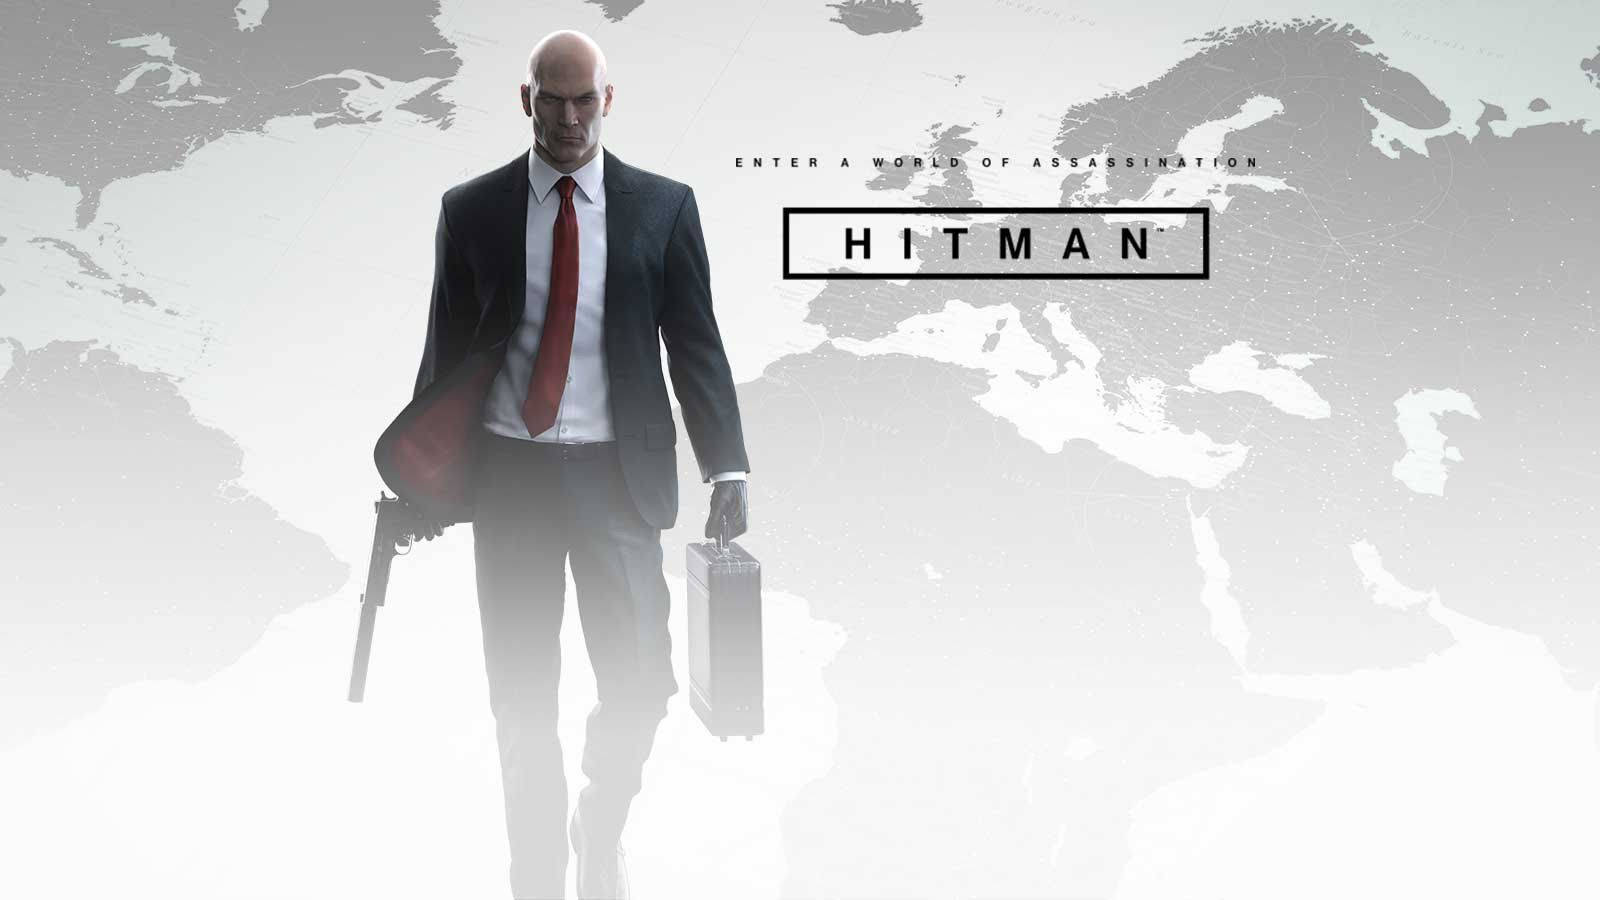 Hitman With World Map Background Background